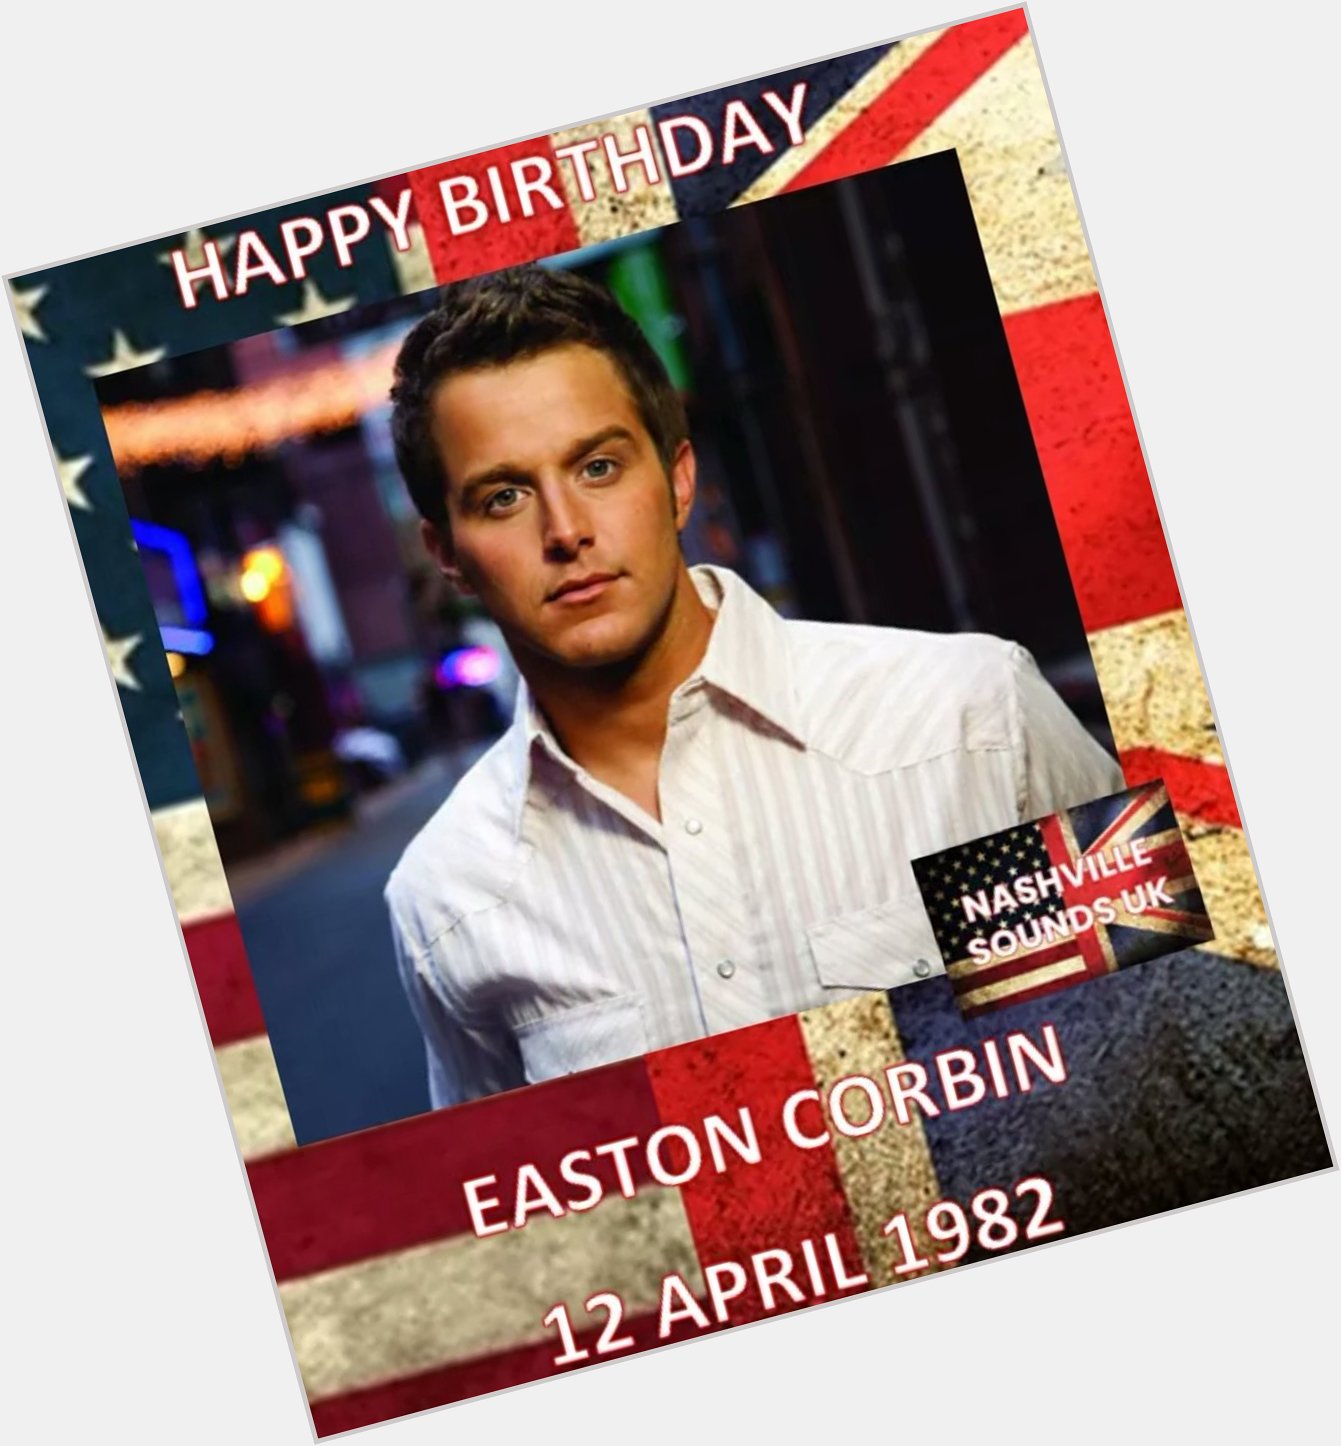 Happy Birthday to Easton Corbin   The Floridian has so far had 2 Number 1s and four top ten songs. 